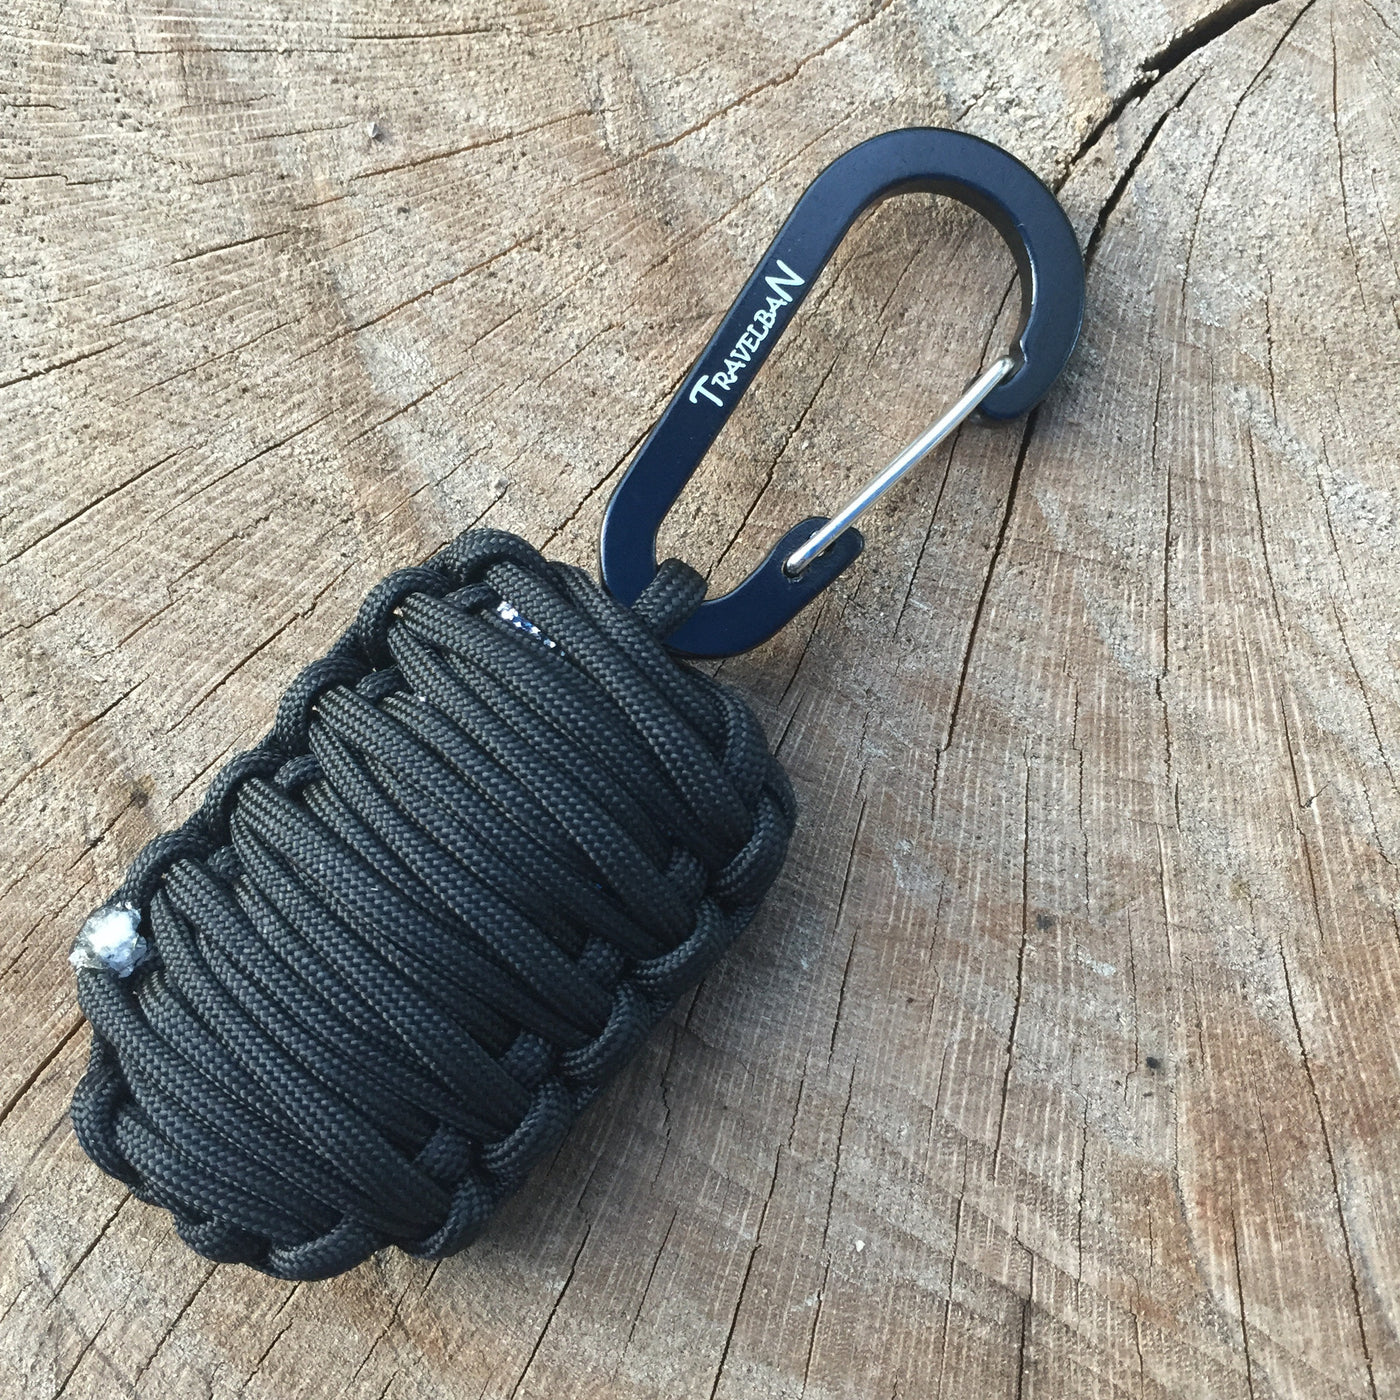 The Paracord Grenade - clip-on survival kit